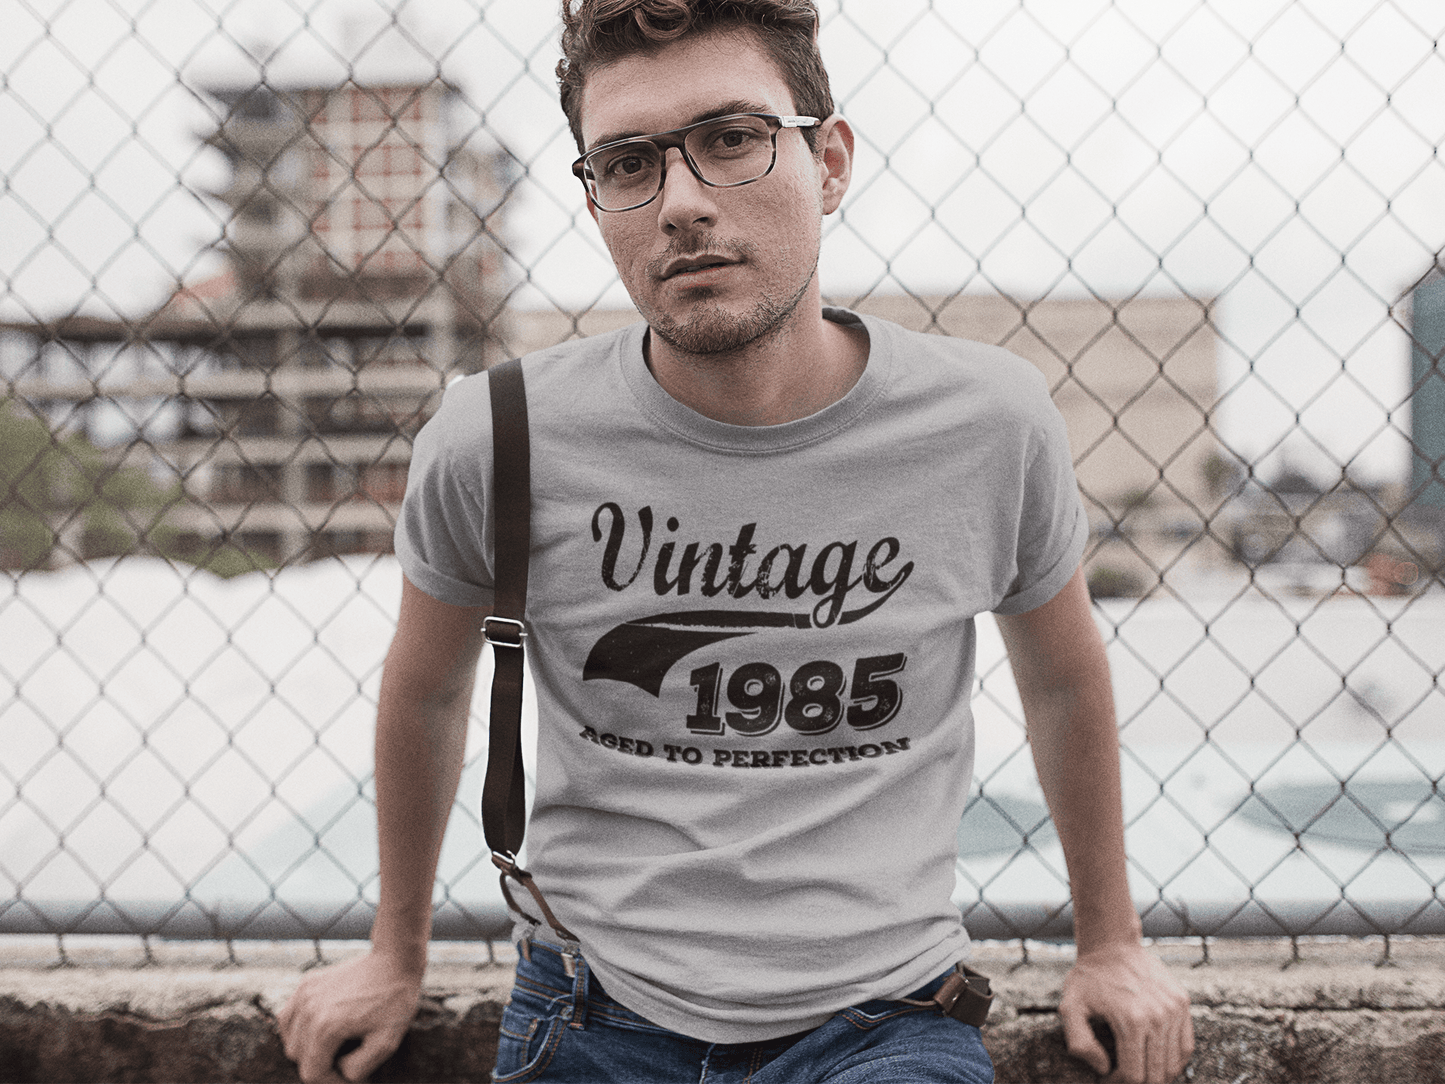 Vintage Aged to Perfection 1985, Grey, Men's Short Sleeve Round Neck T-shirt, gift t-shirt 00346